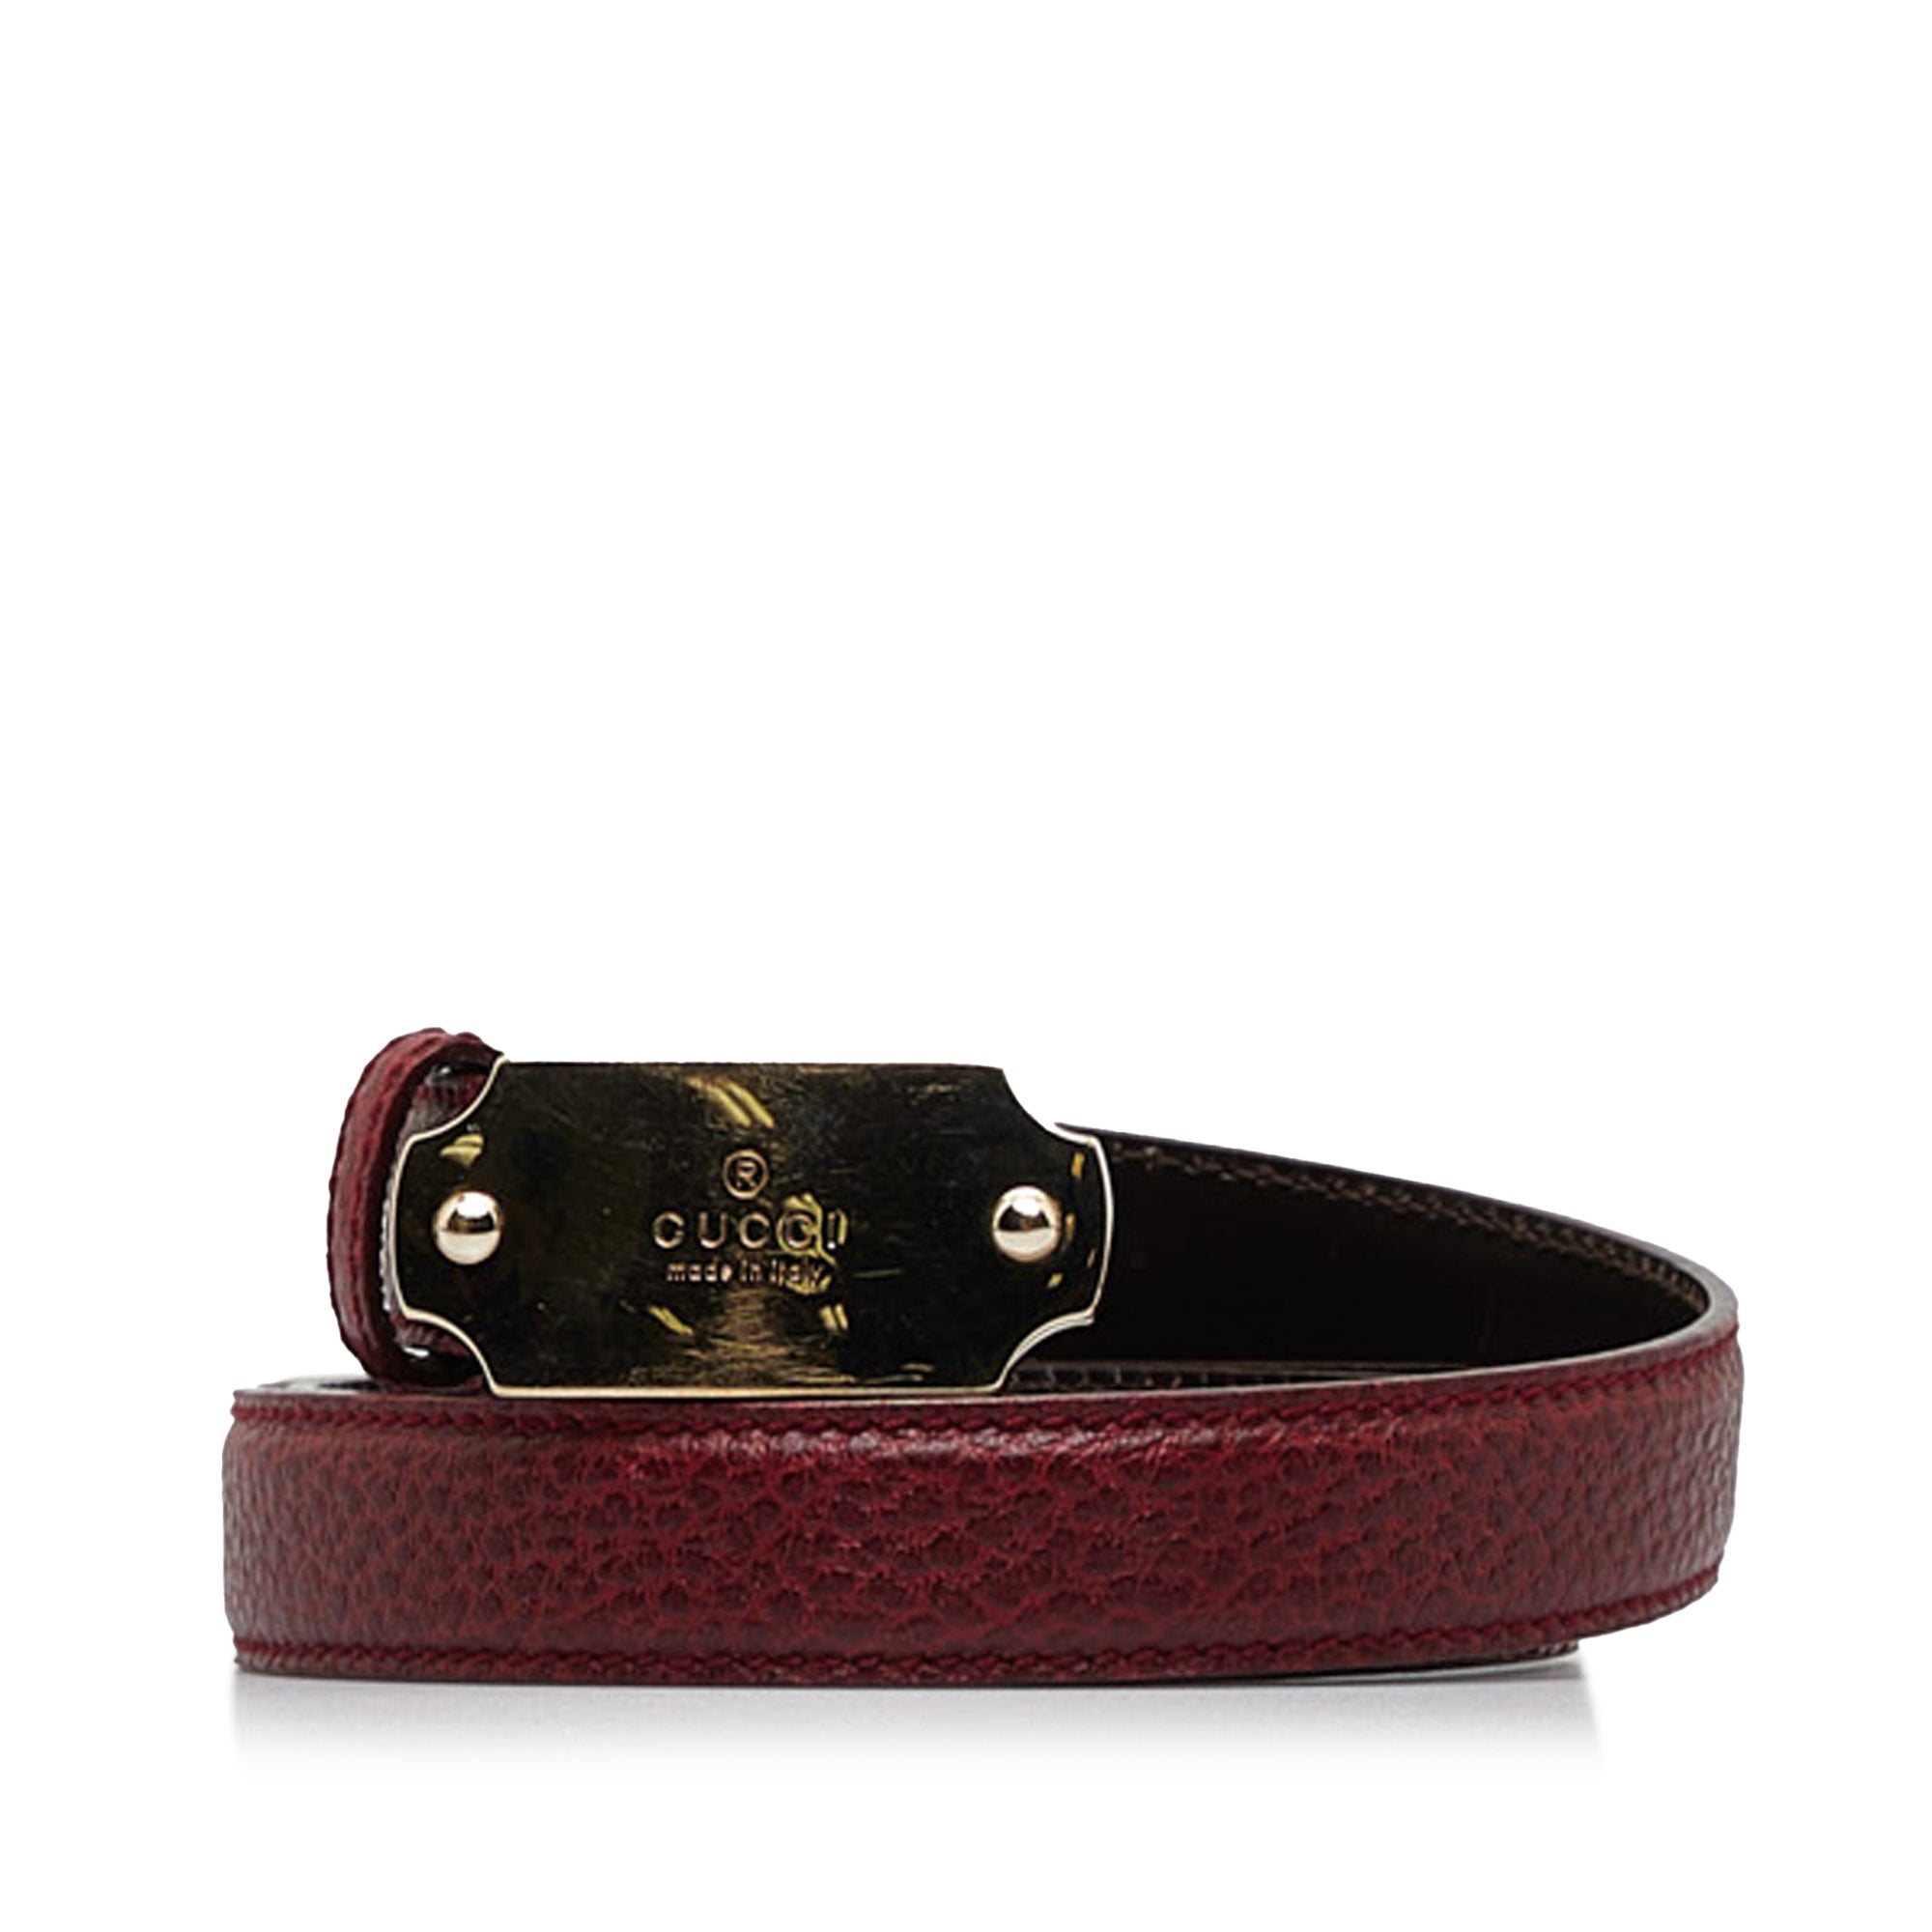 MCM Reversible Belt Change From Black And Red Side